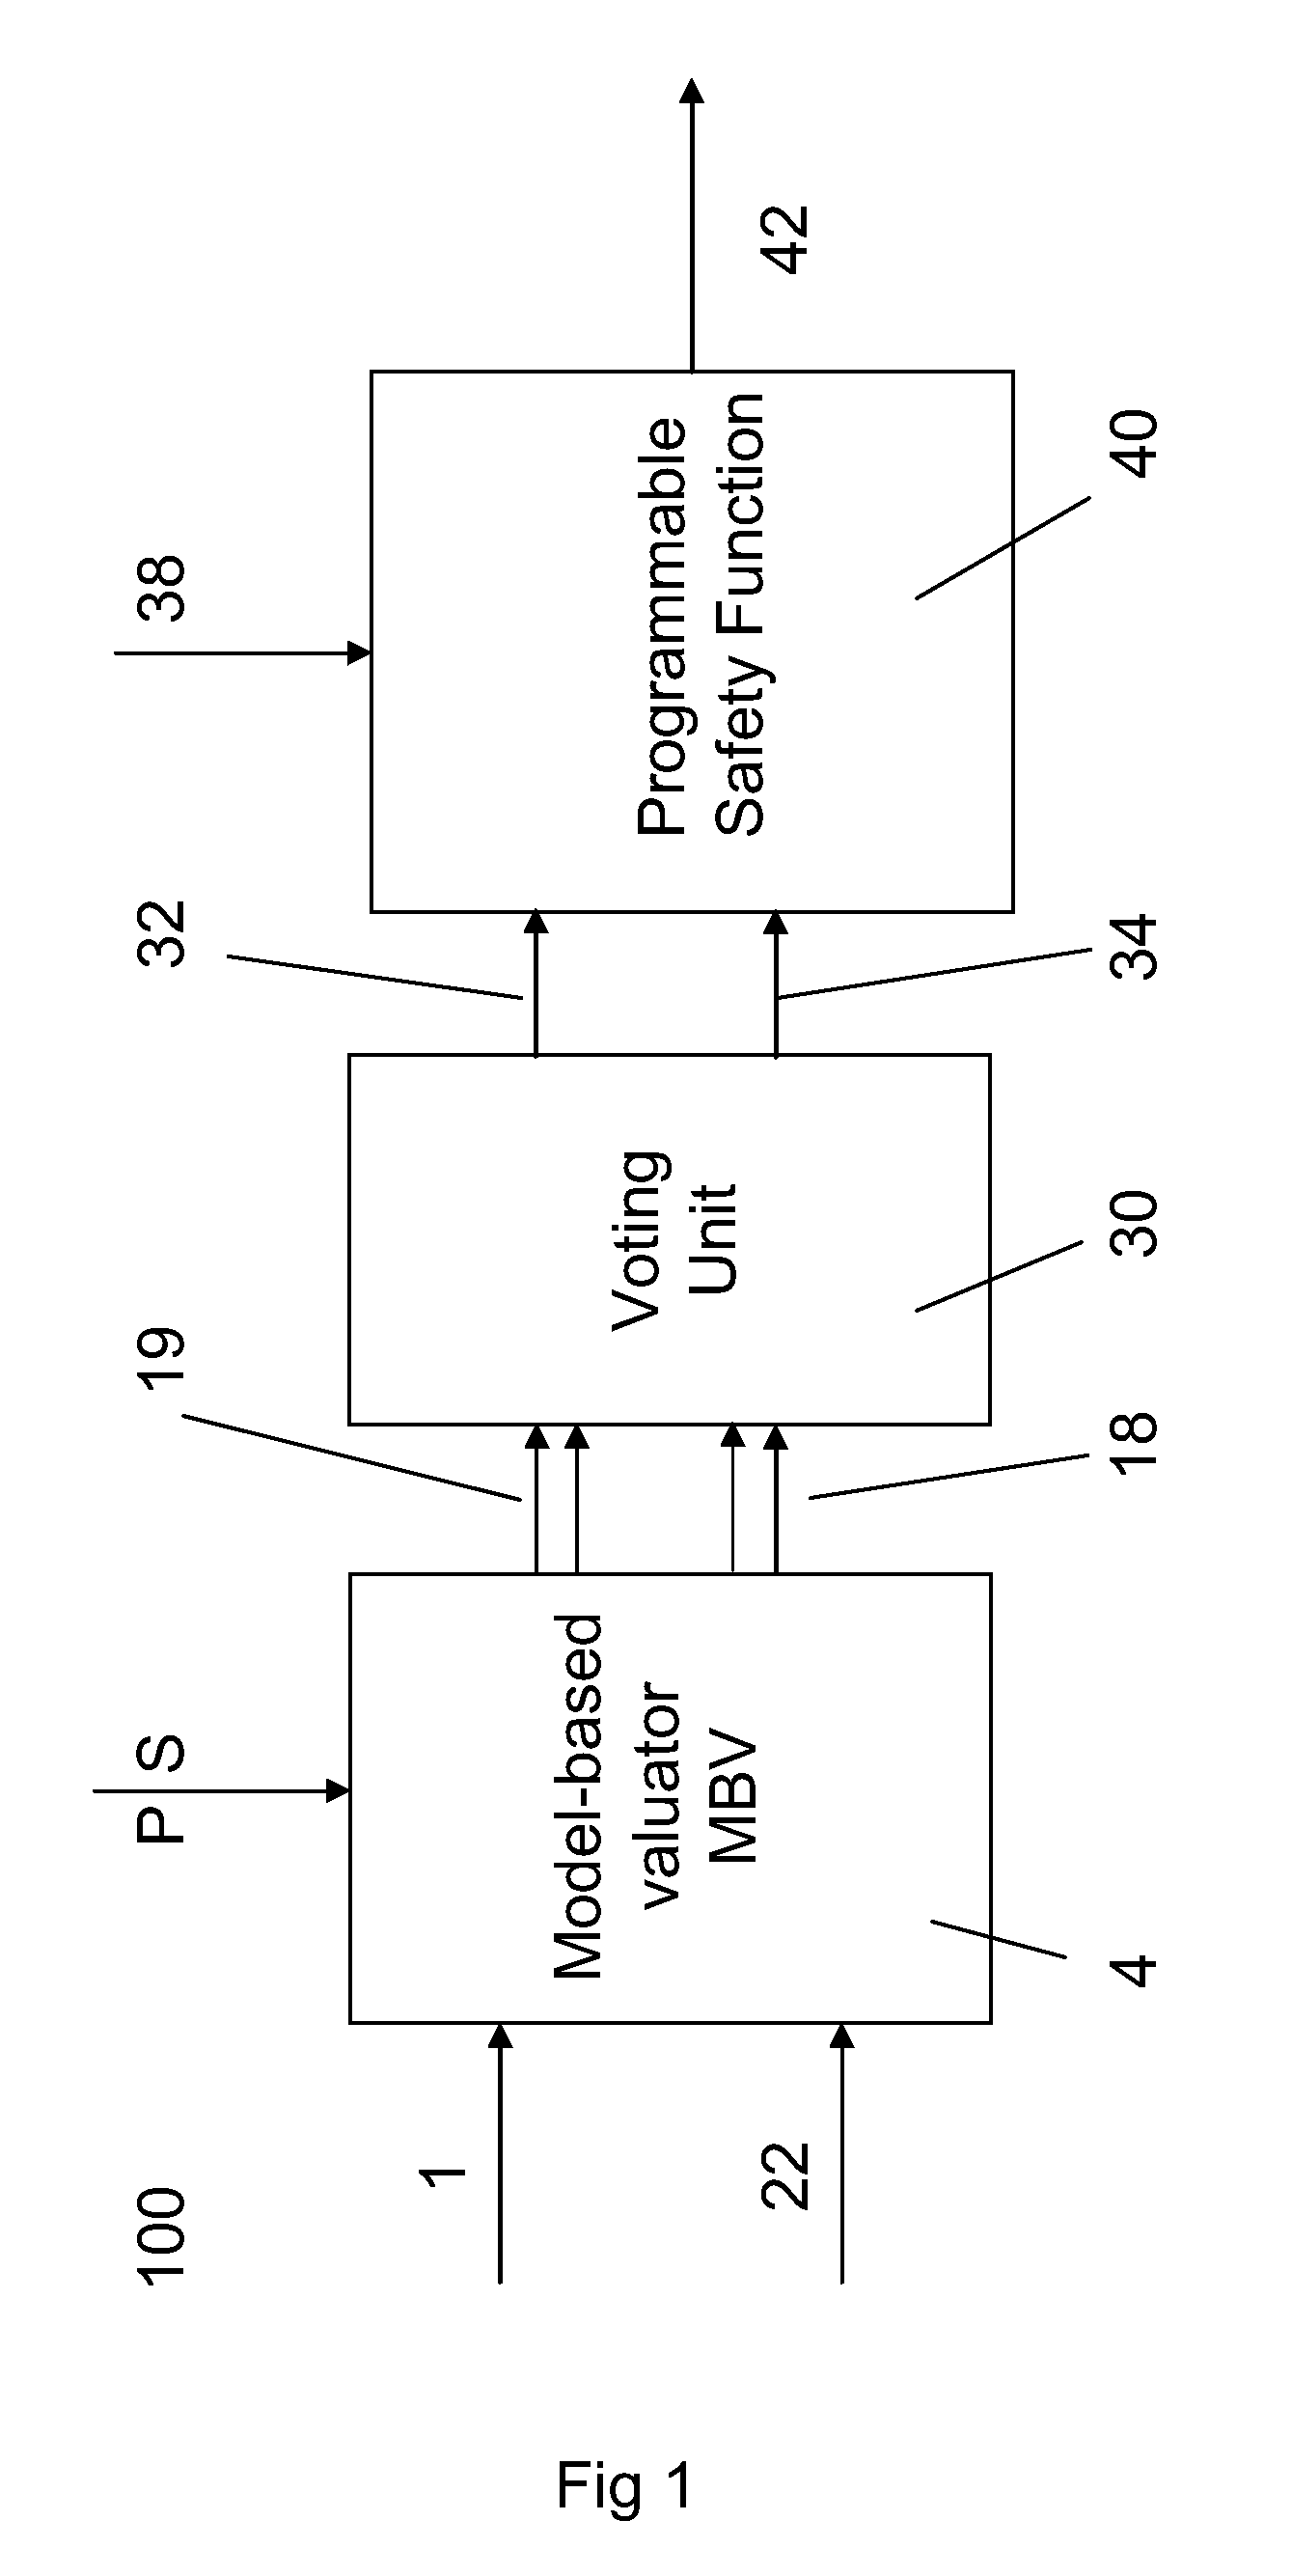 Method and Device for Controlling Motion of an Industrial Robot With a Position Switch